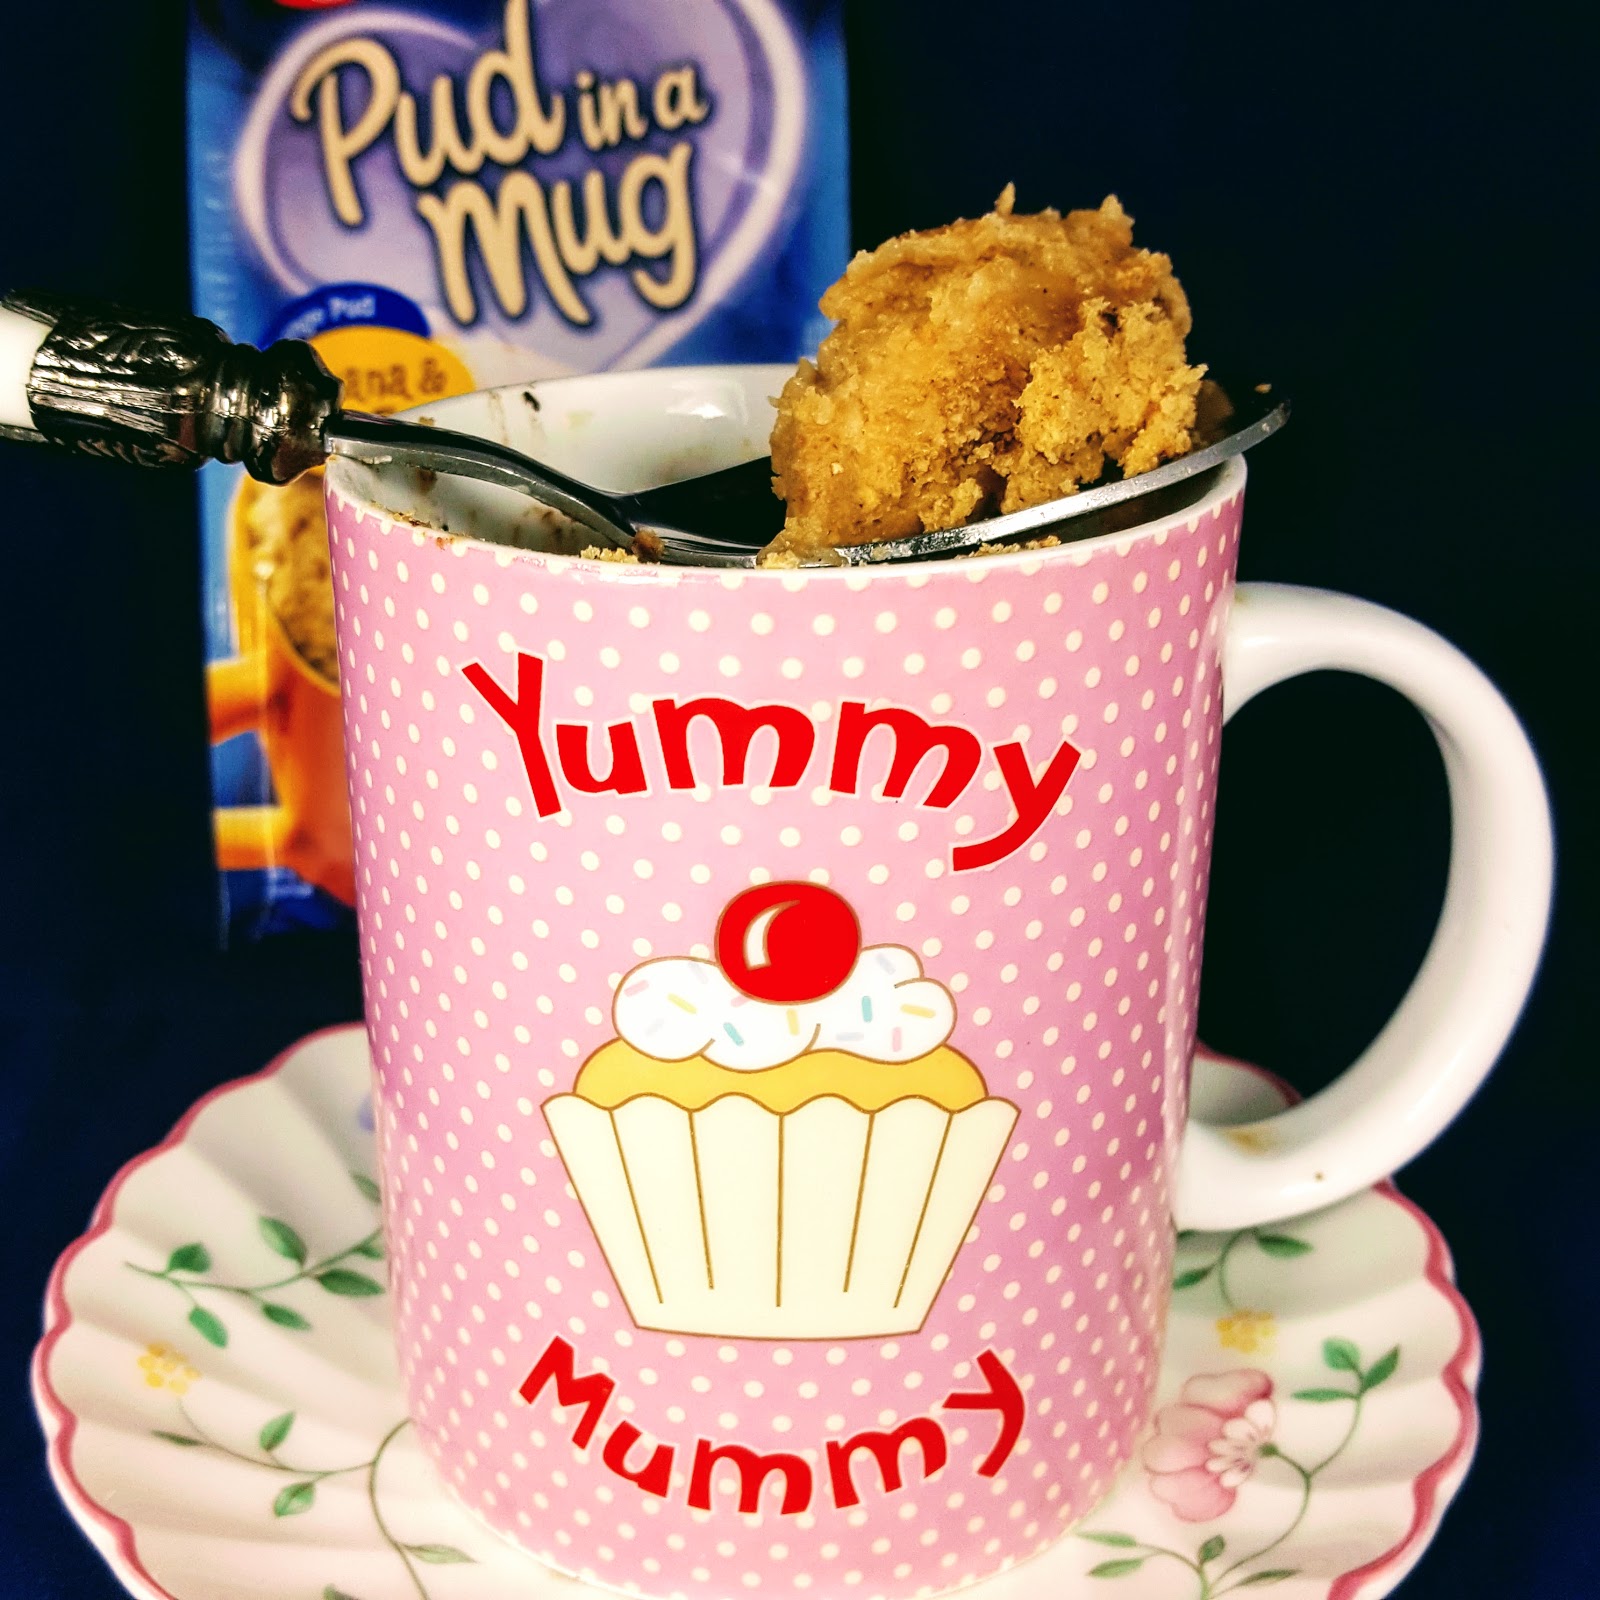 New Dr. Oetker’s Pud In A Mug Banana And Choc Chip Review